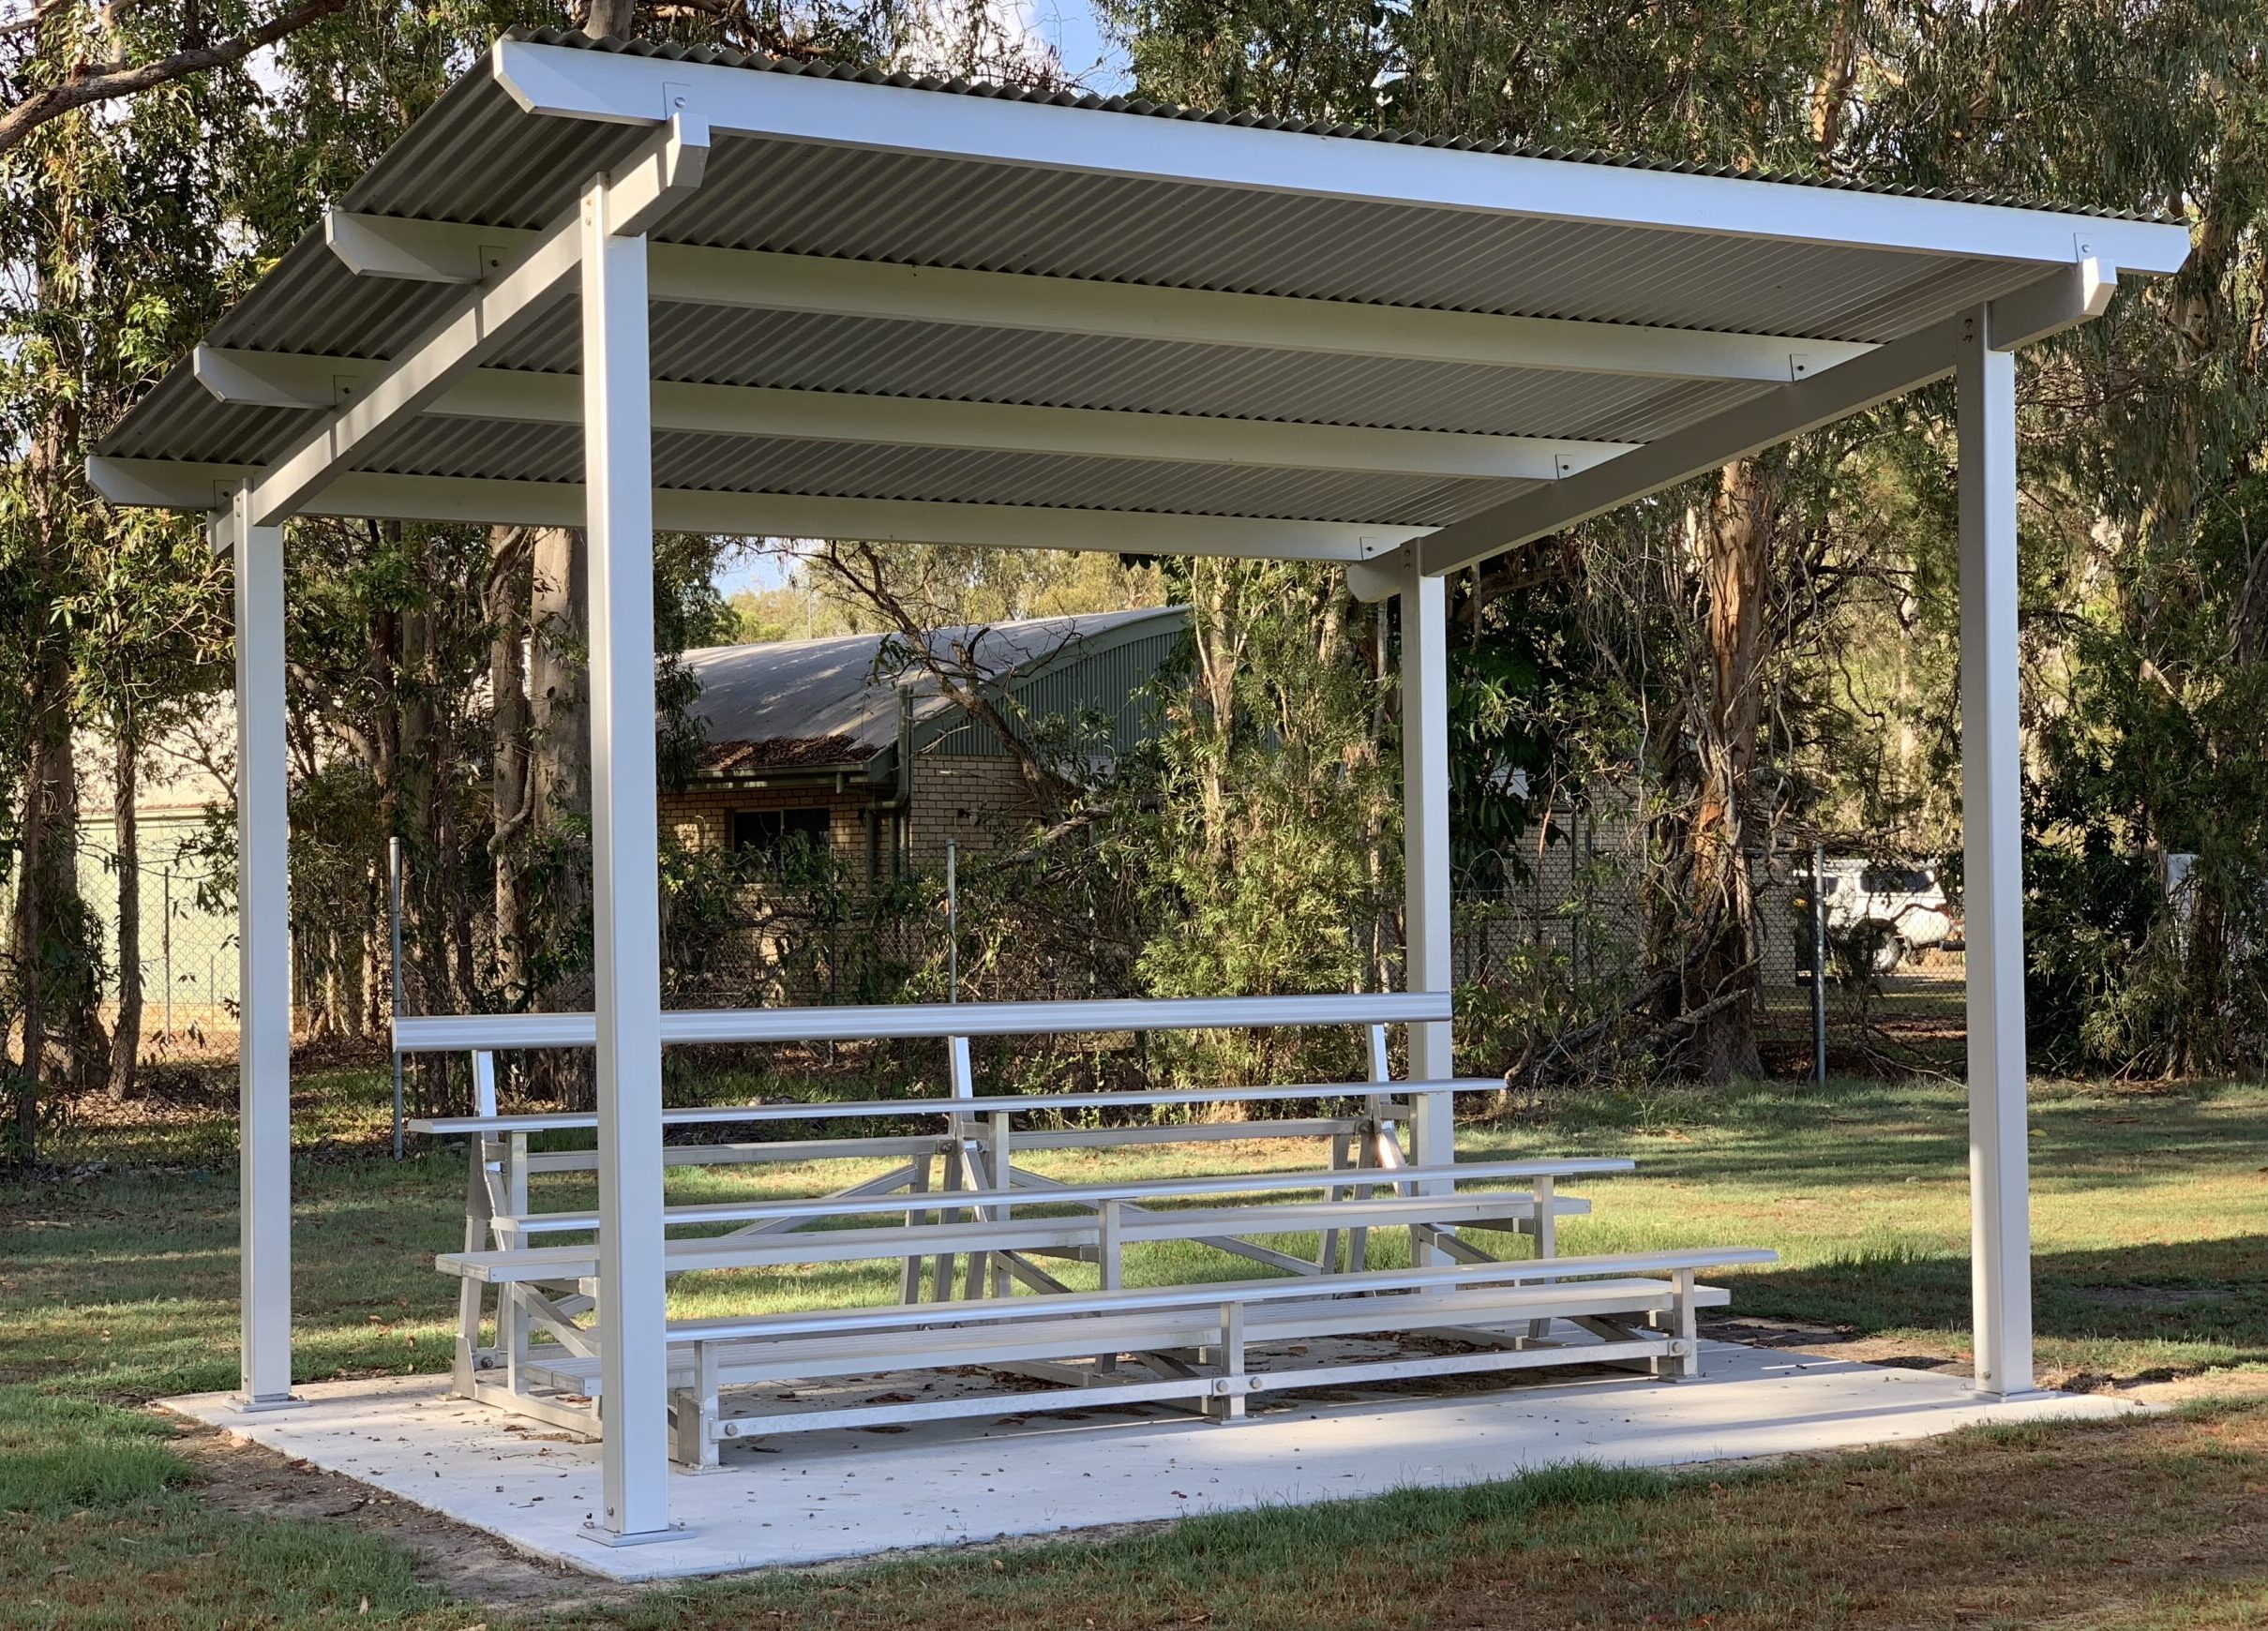 a tiered seating area with a roof shelter in an australian park